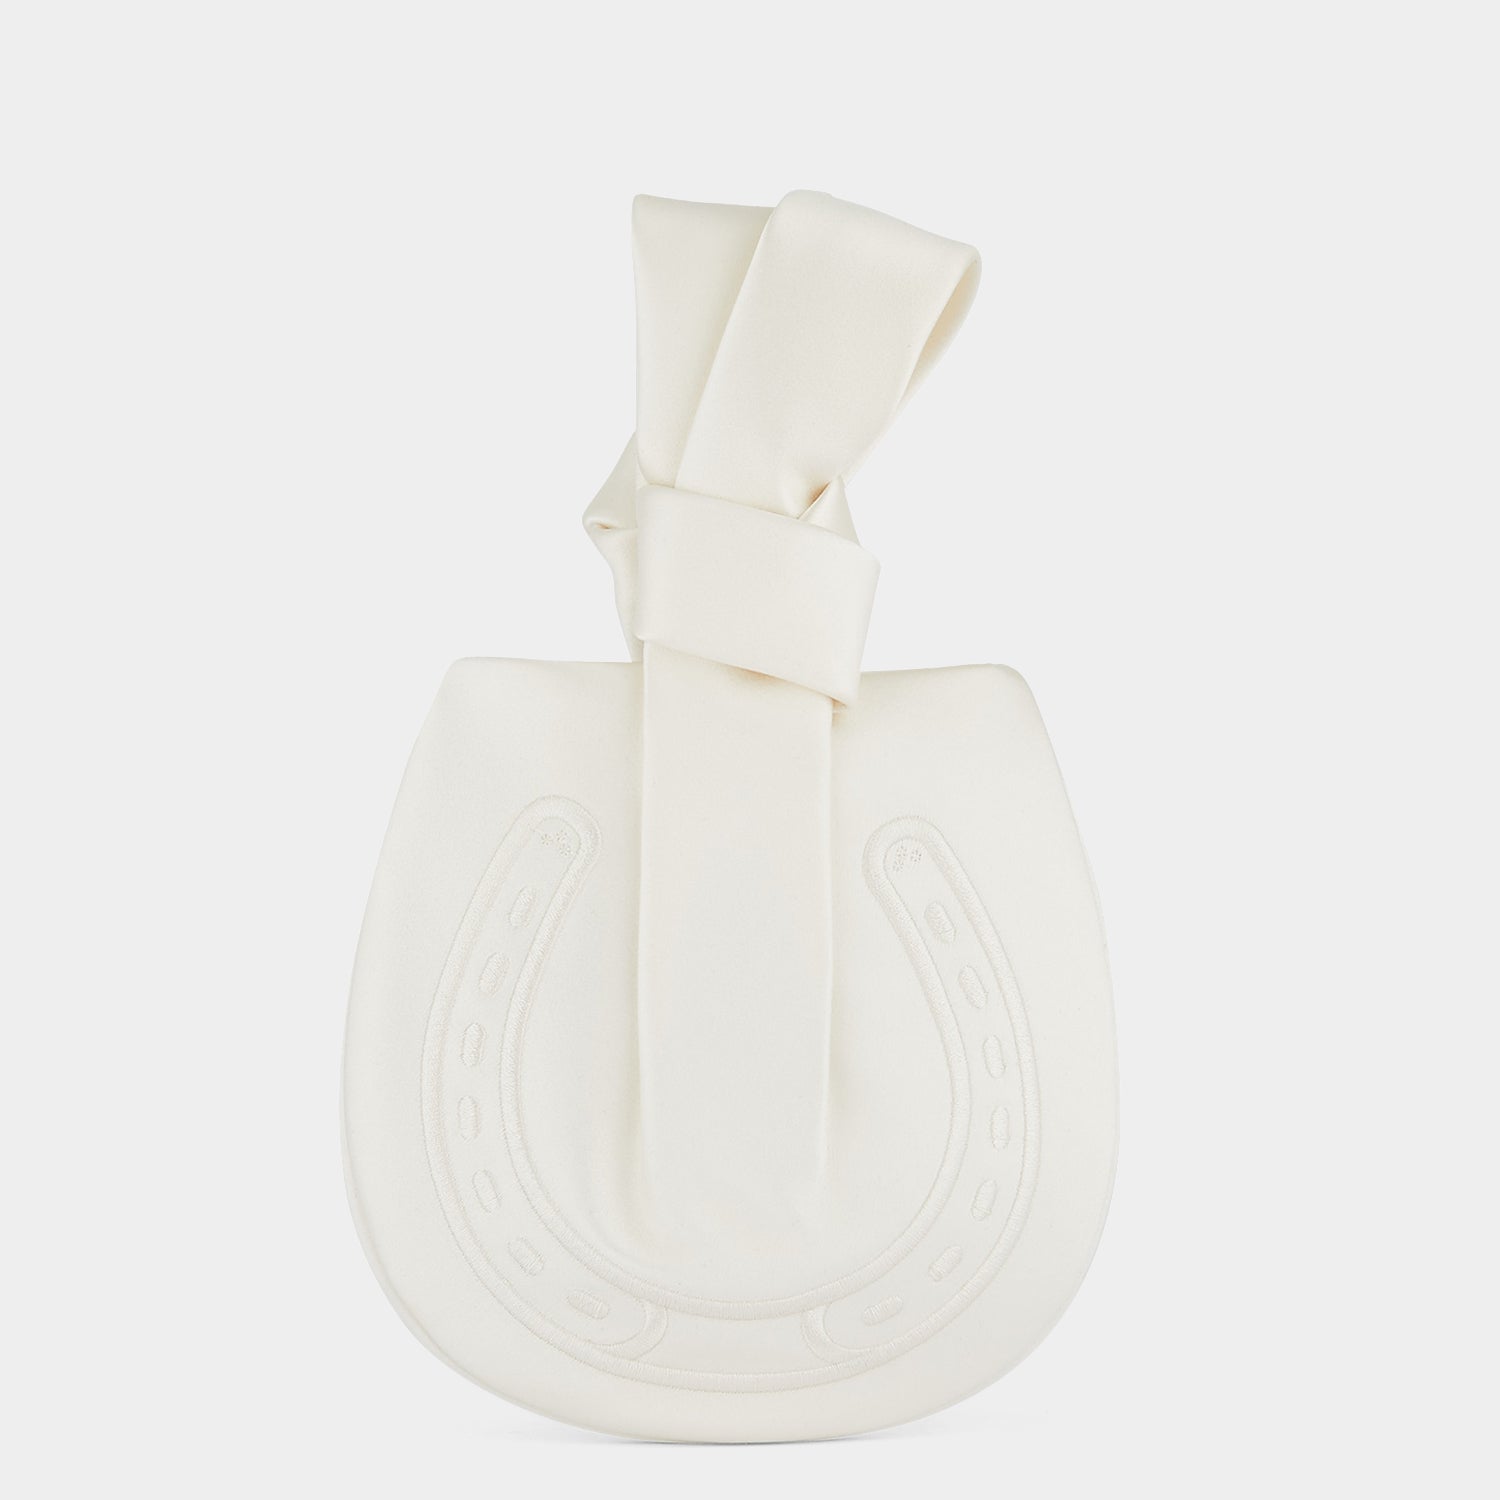 Tie the Knot Clutch -

                  
                    Double Satin in Ivory -
                  

                  Anya Hindmarch EU
